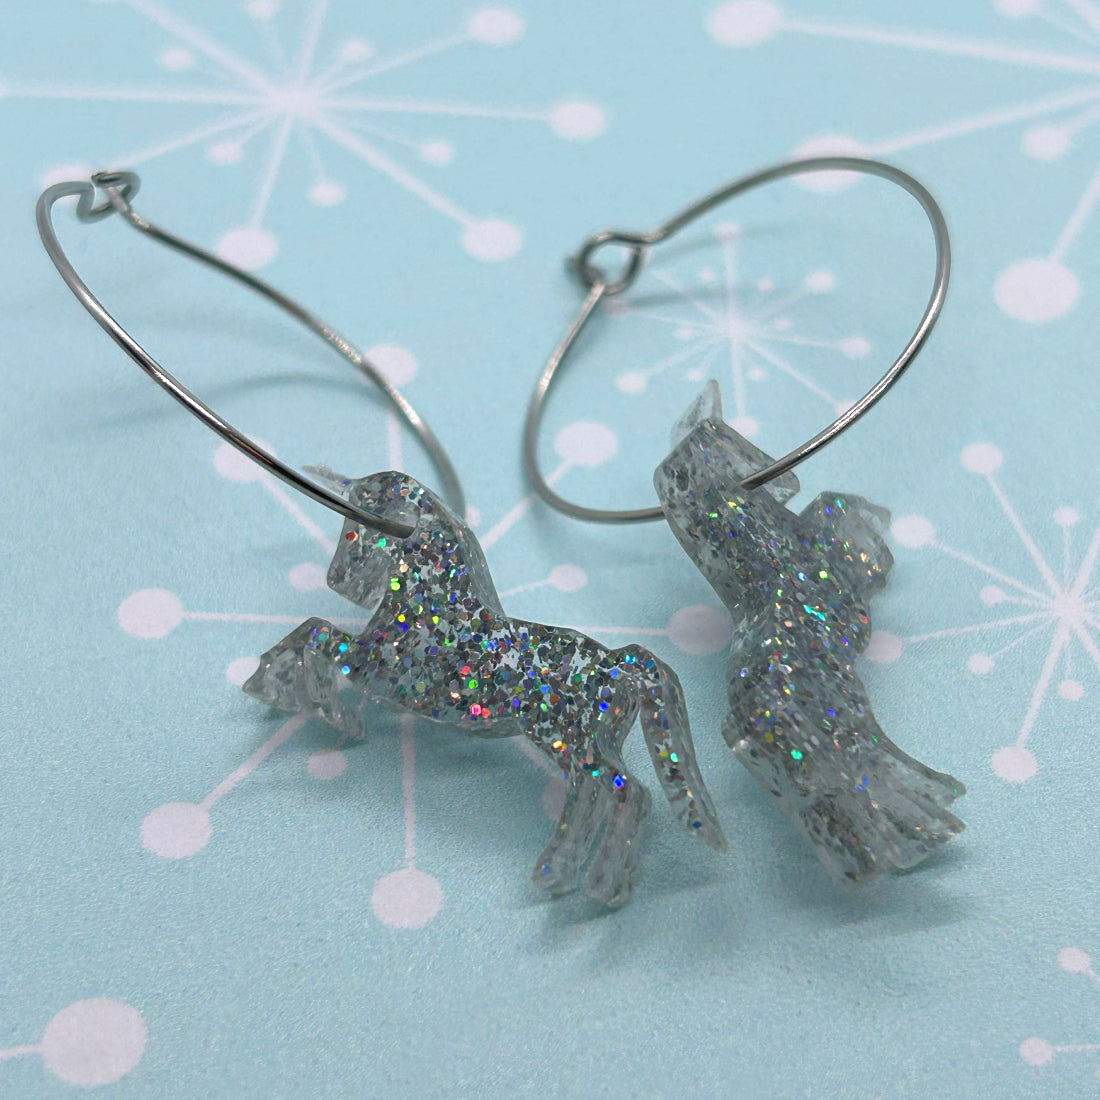 Acrylic Unicorn earrings, brooches and necklaces - The Argentum Design Co